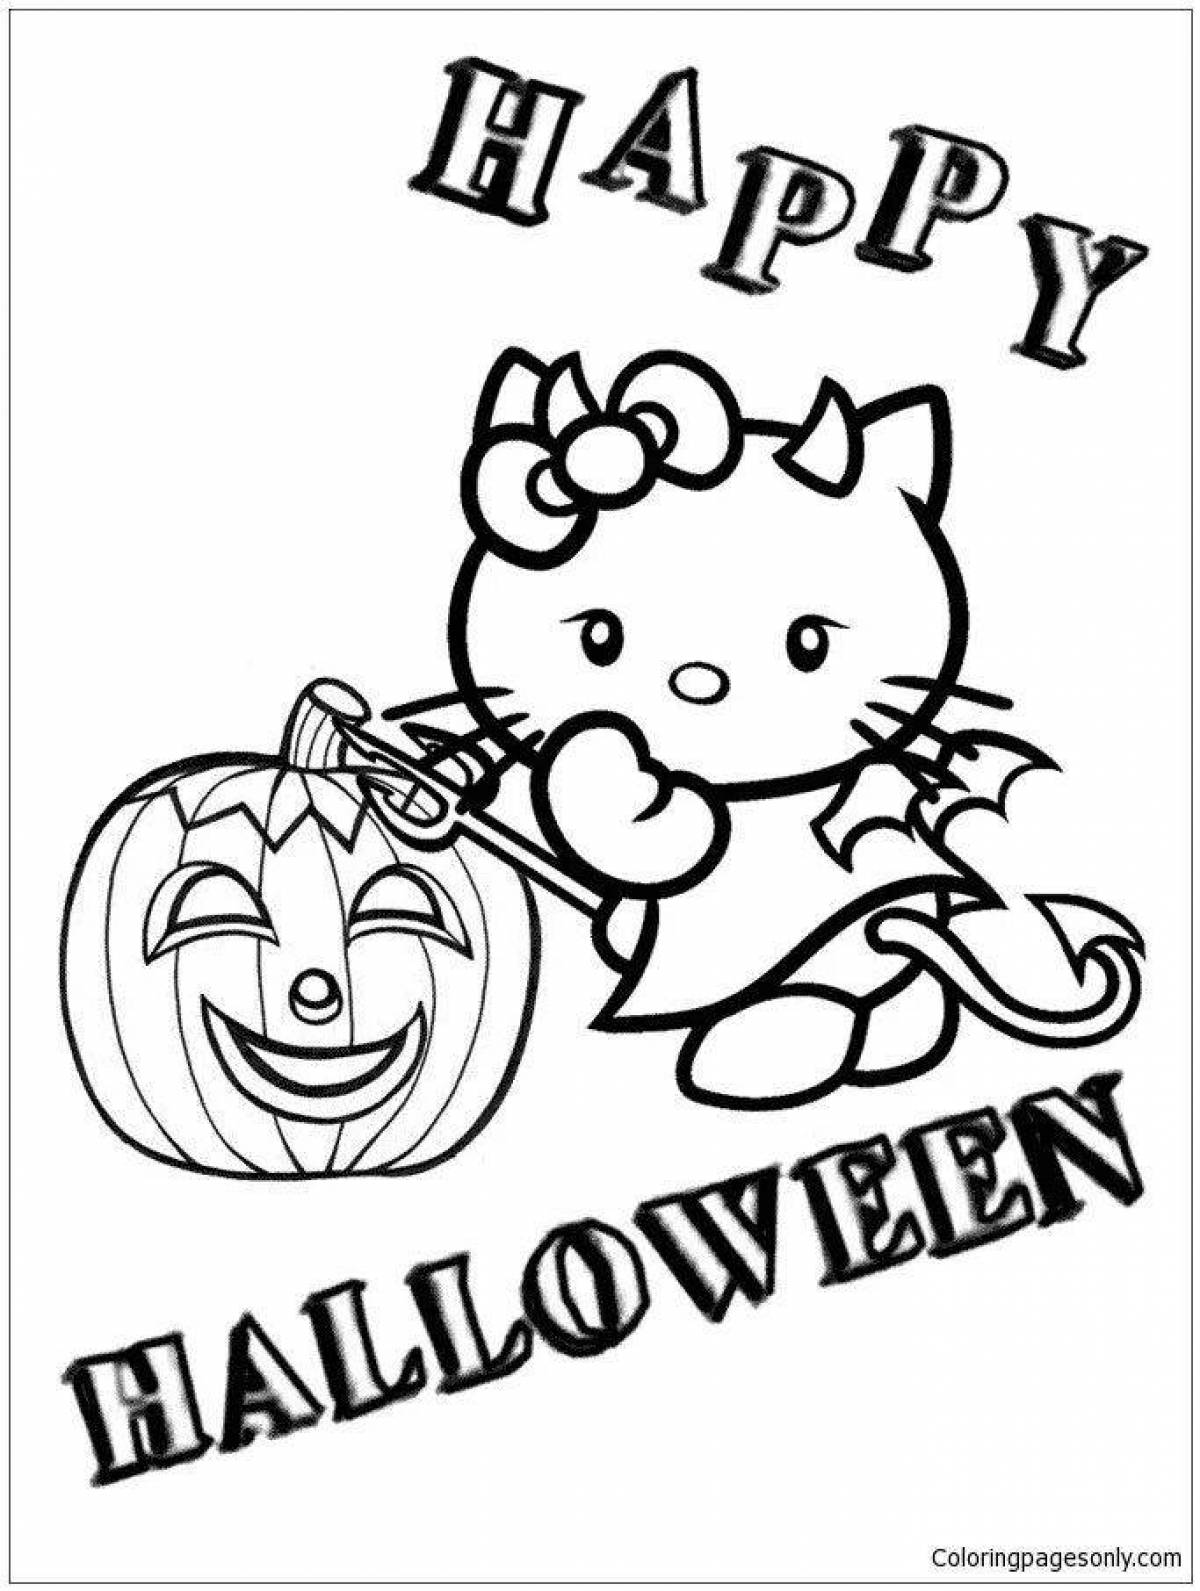 Awesome halloween kitty coloring page